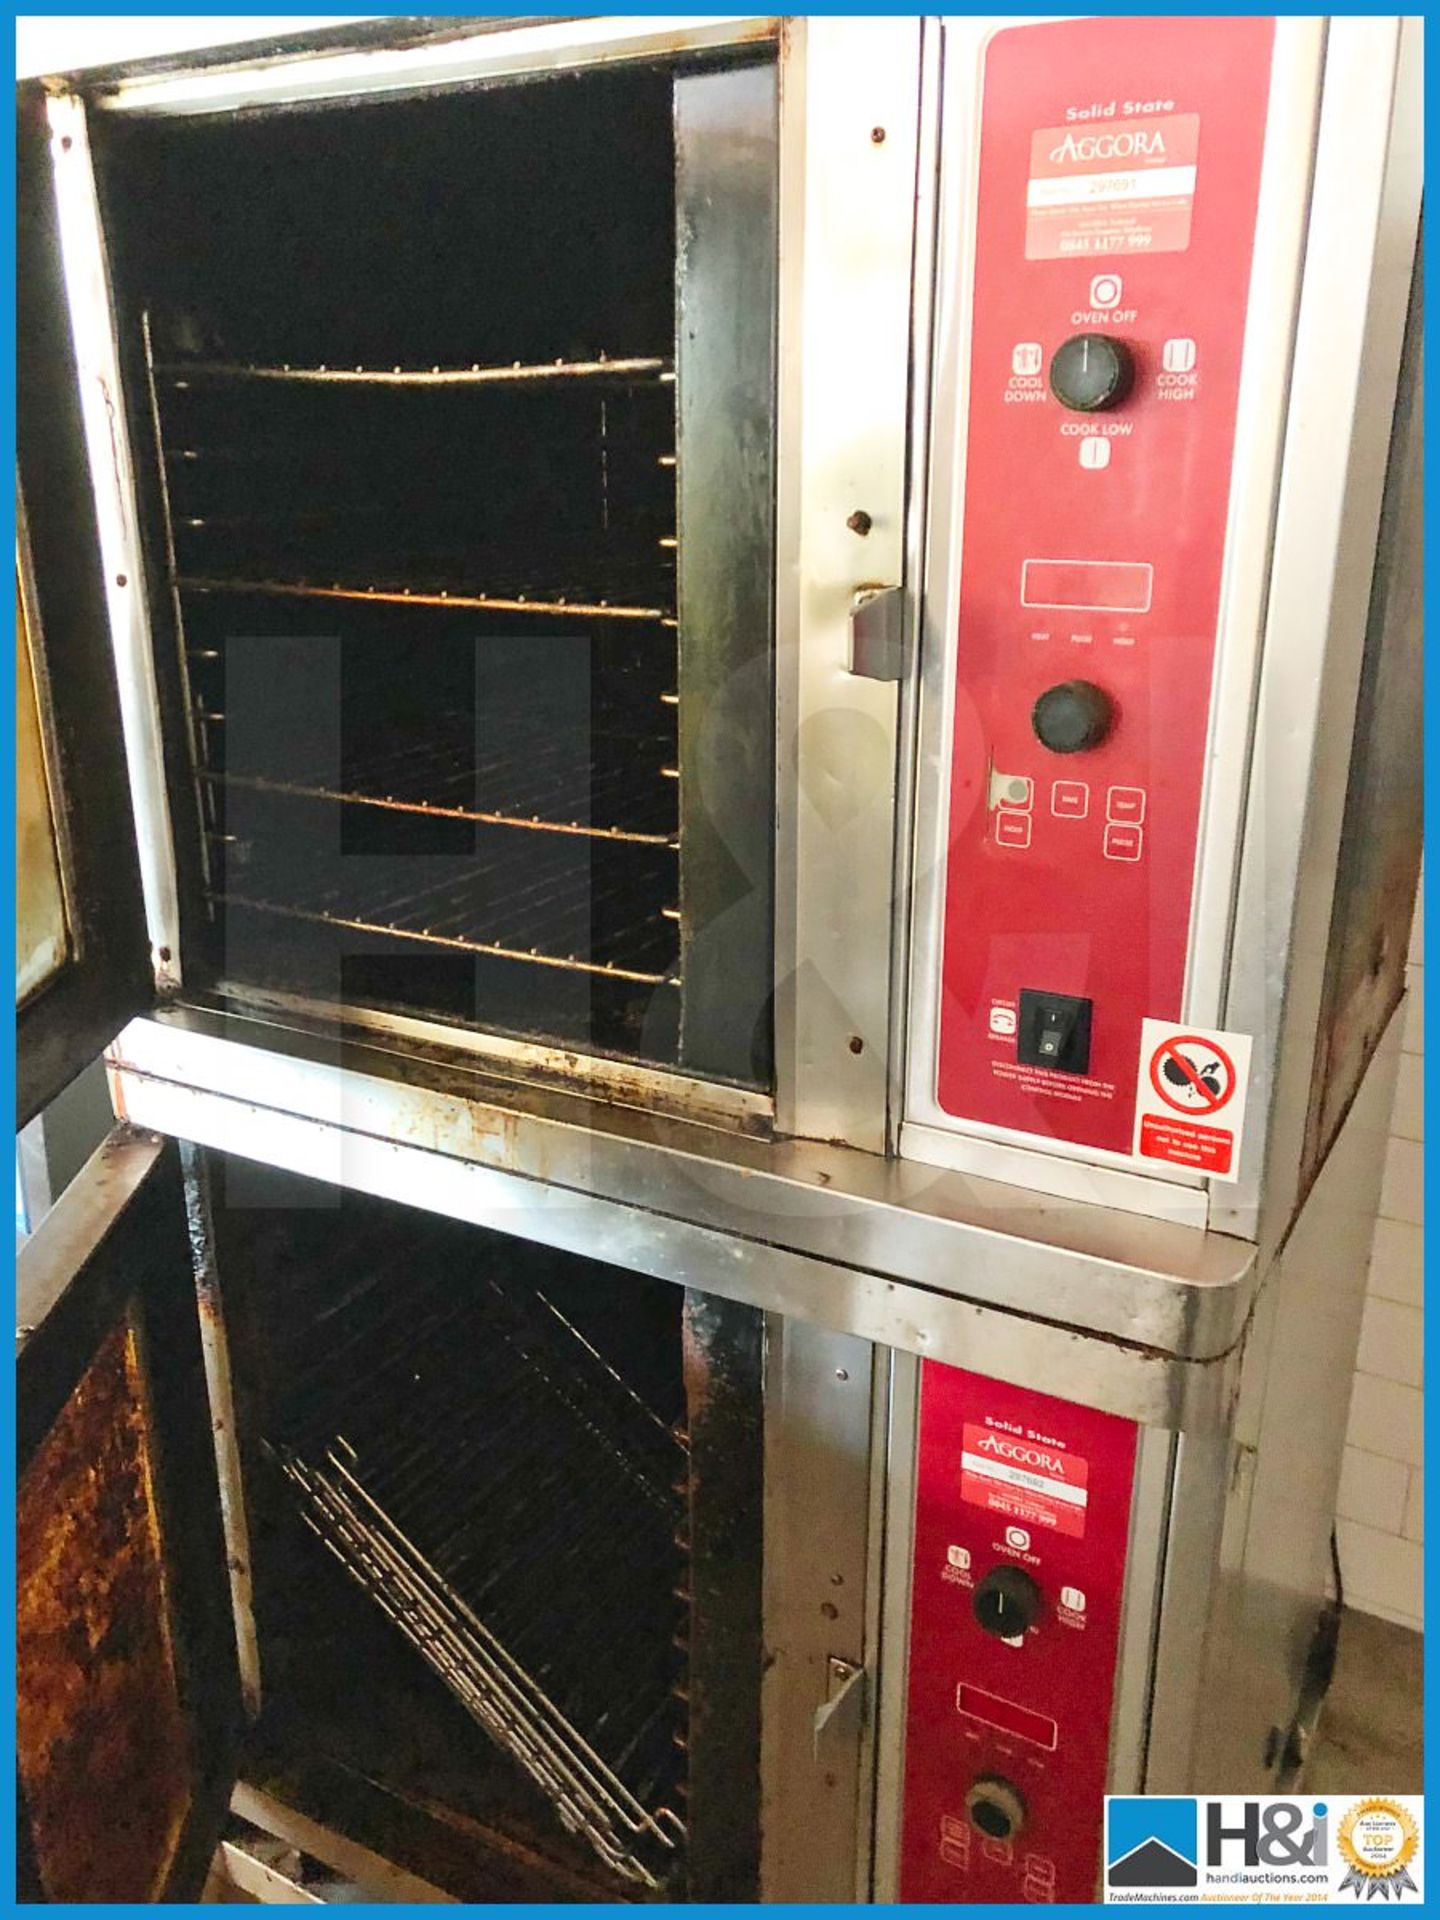 Blodgett commercial oven three phase on stainless steel stand. - Image 4 of 4